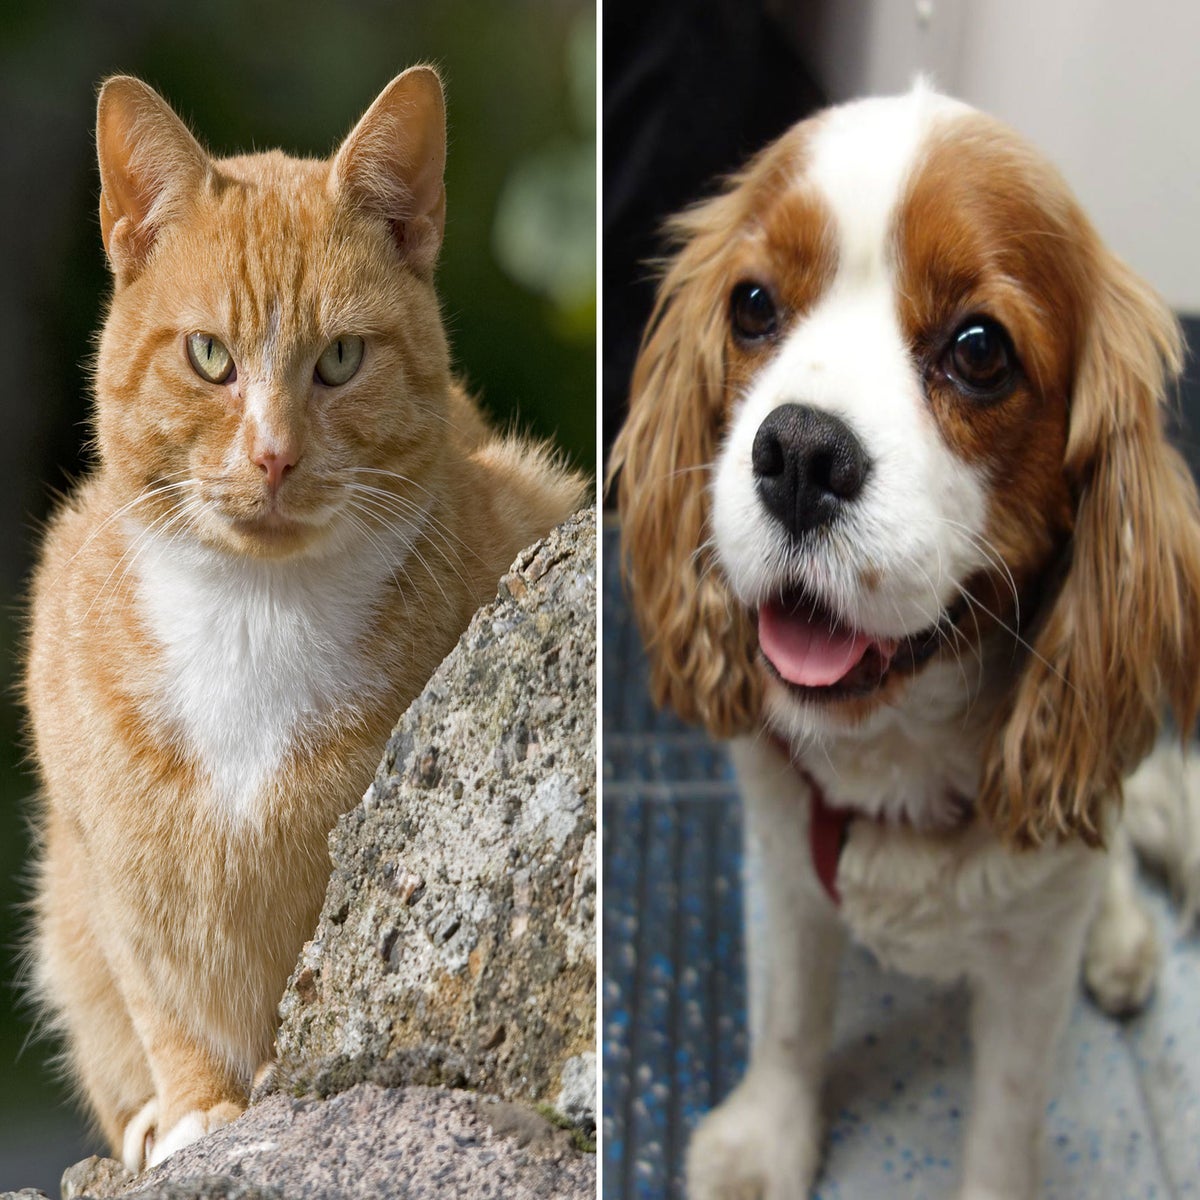 Cats vs dogs: in terms of evolution, are we barking up the wrong tree?, Science